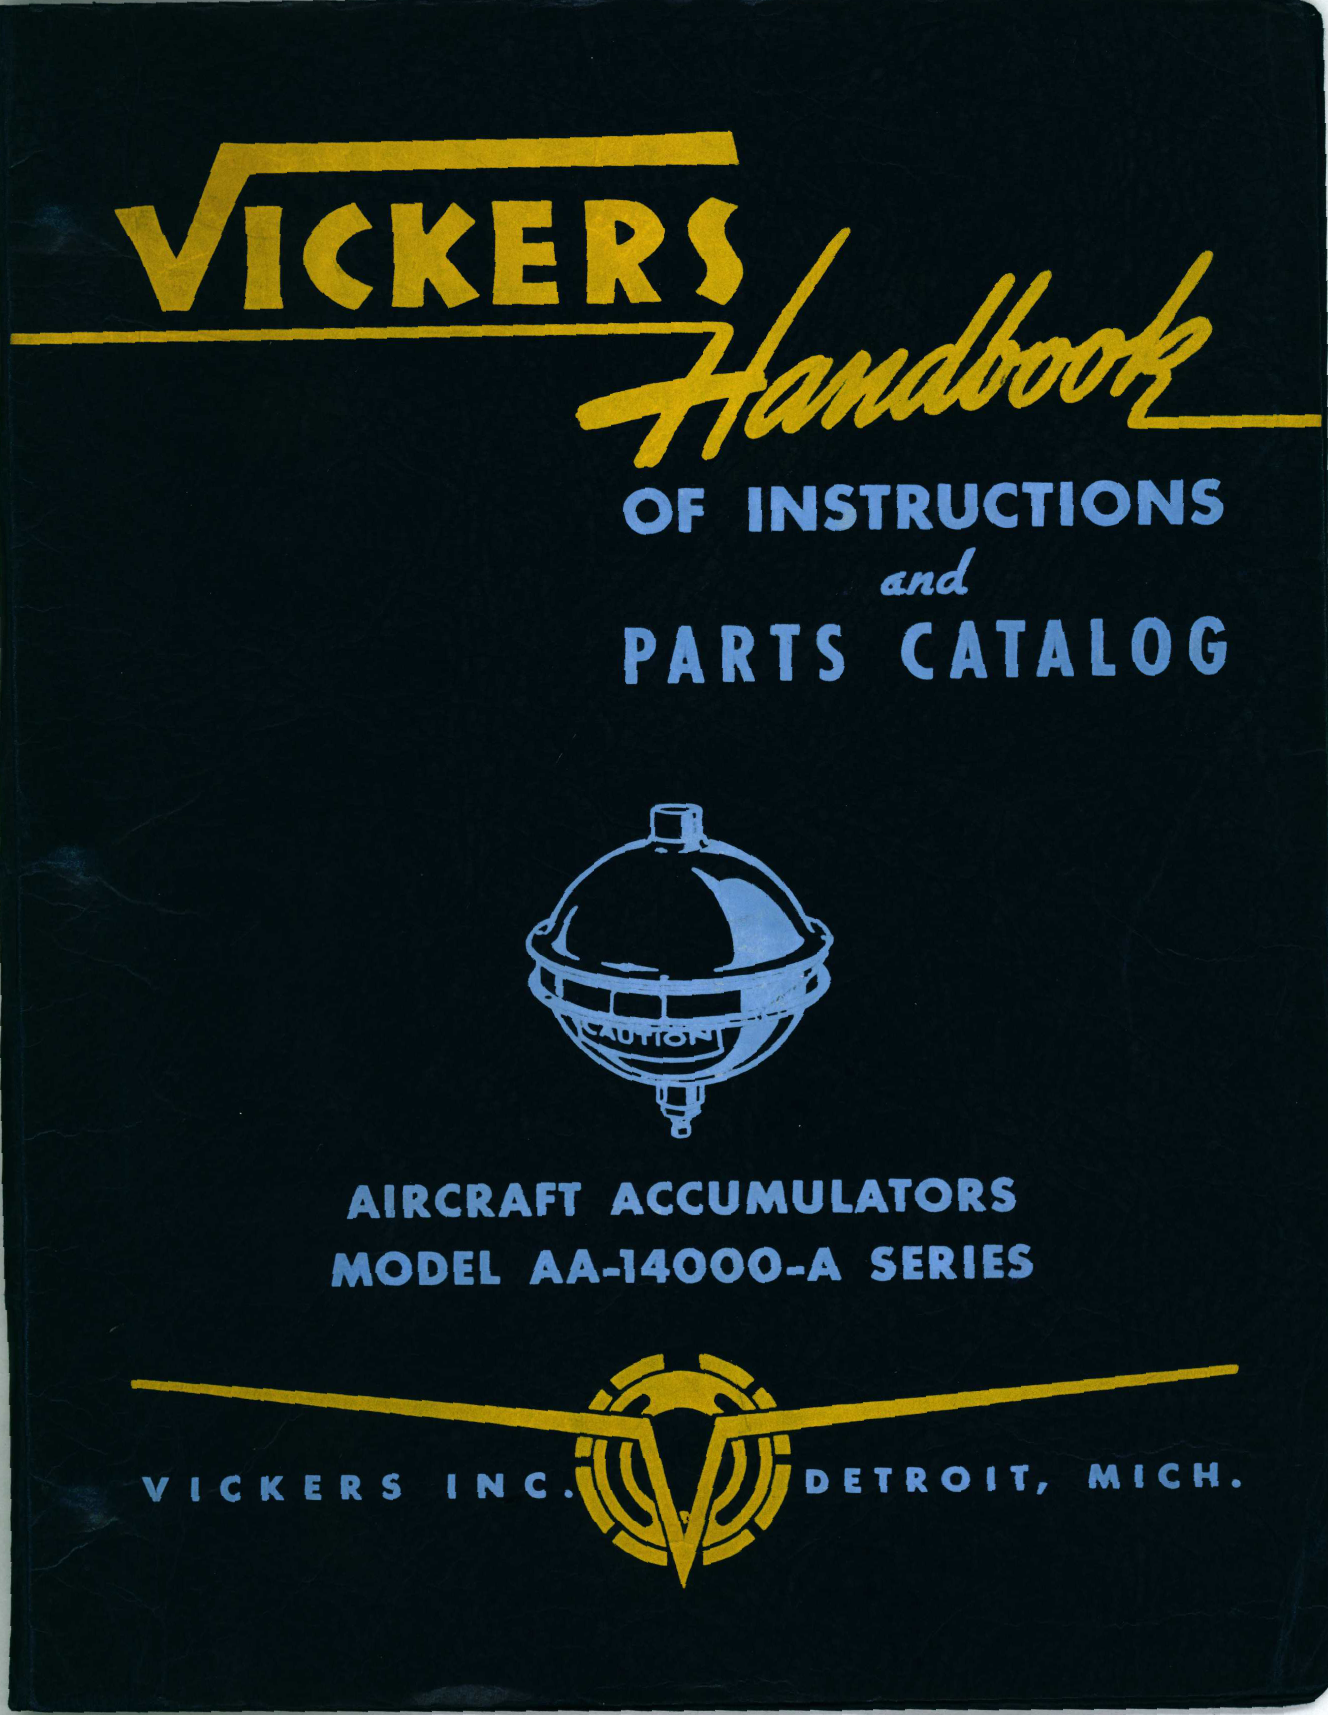 Sample page 1 from AirCorps Library document: Handbook Of Instructions with Parts Catalog for Aircraft Accumulators AA-14000-A Series